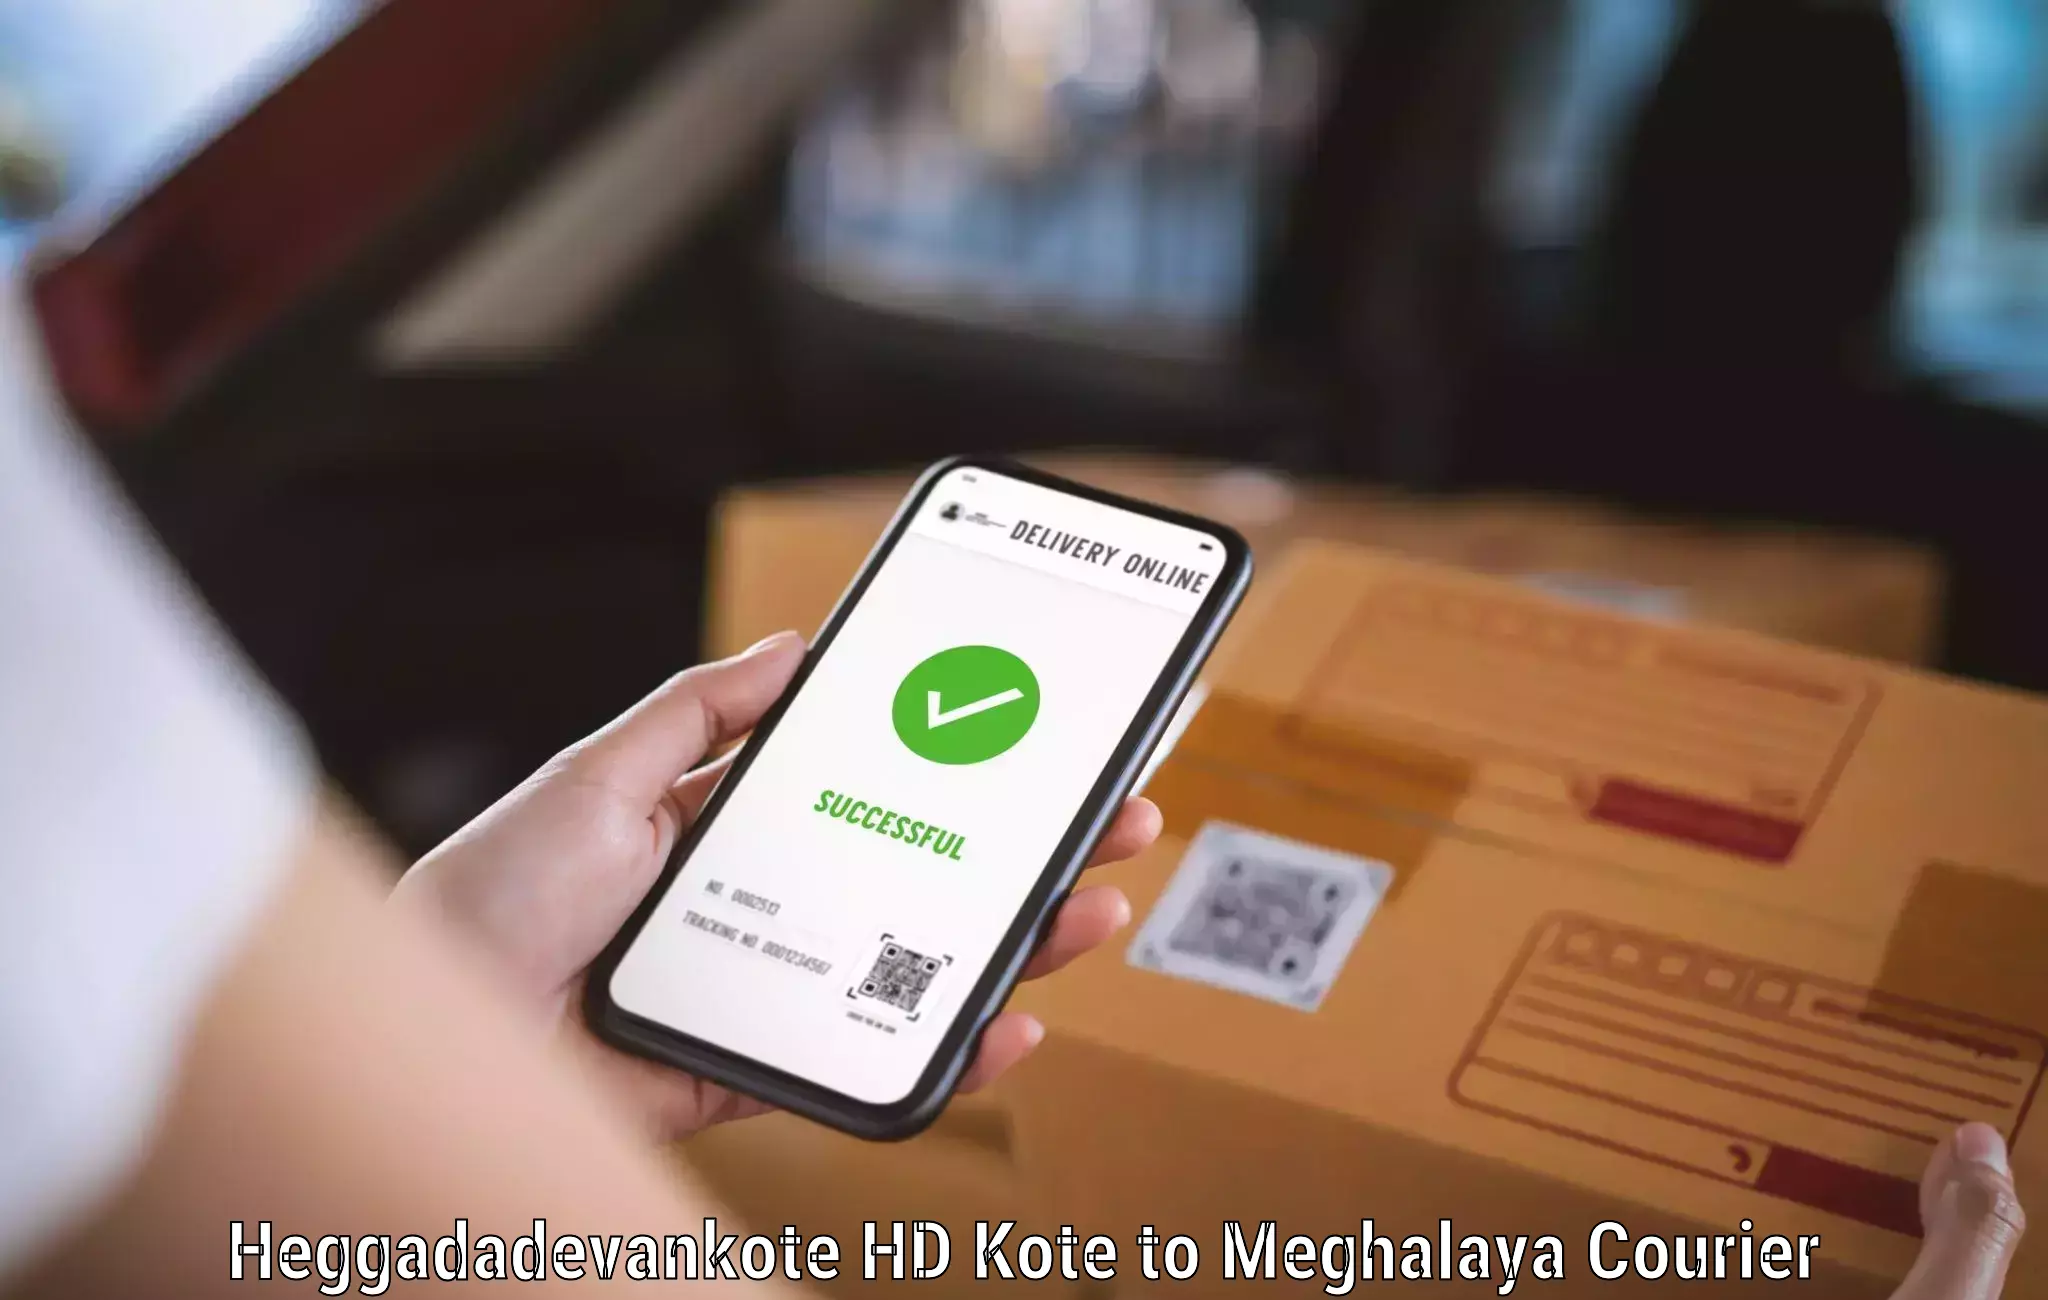 Express package delivery Heggadadevankote HD Kote to Nongpoh